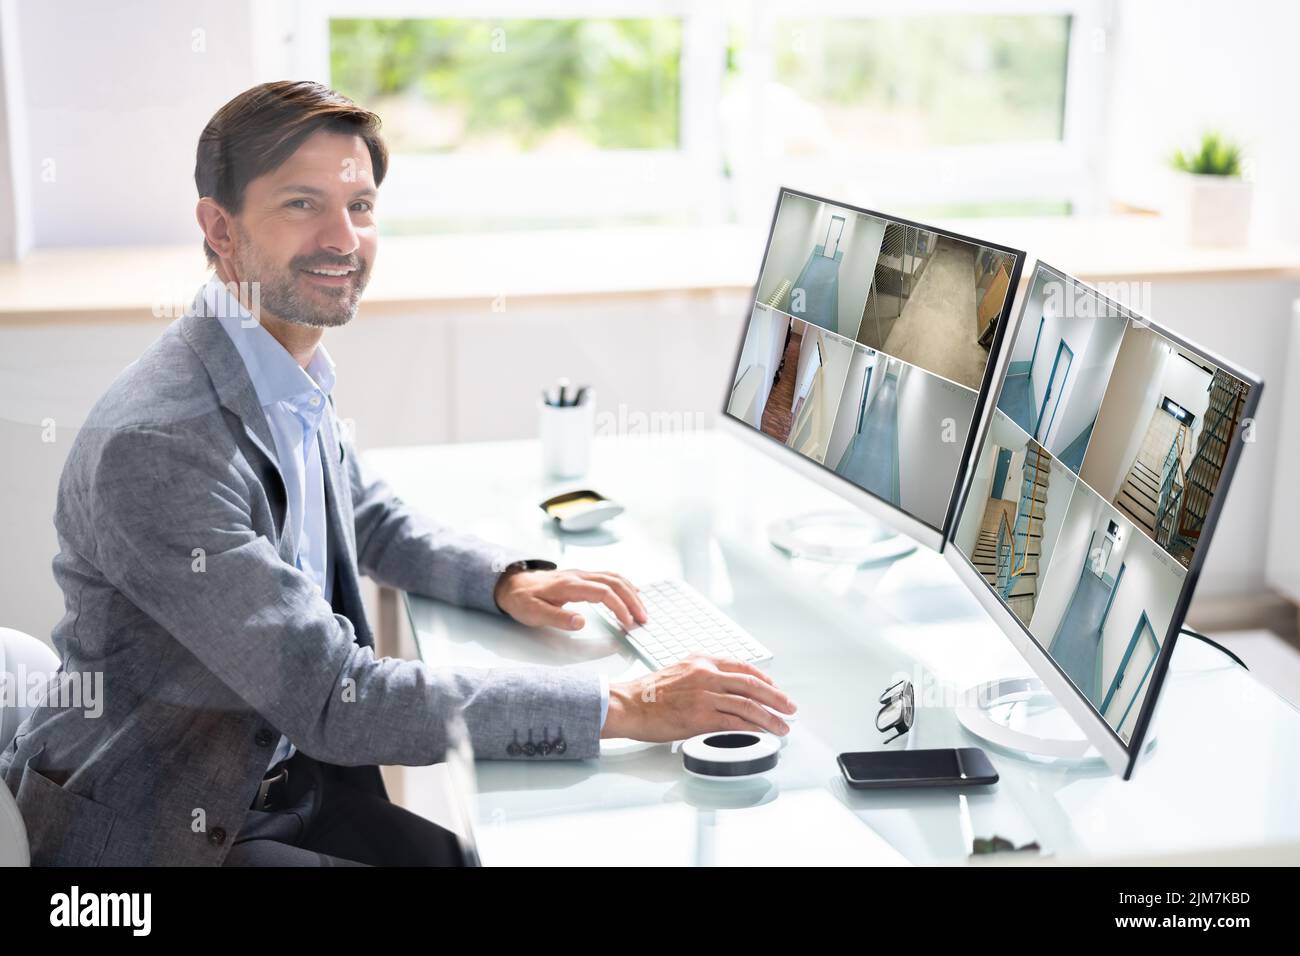 Business Security Monitor Tech. Video Camera CCTV System Stock Photo